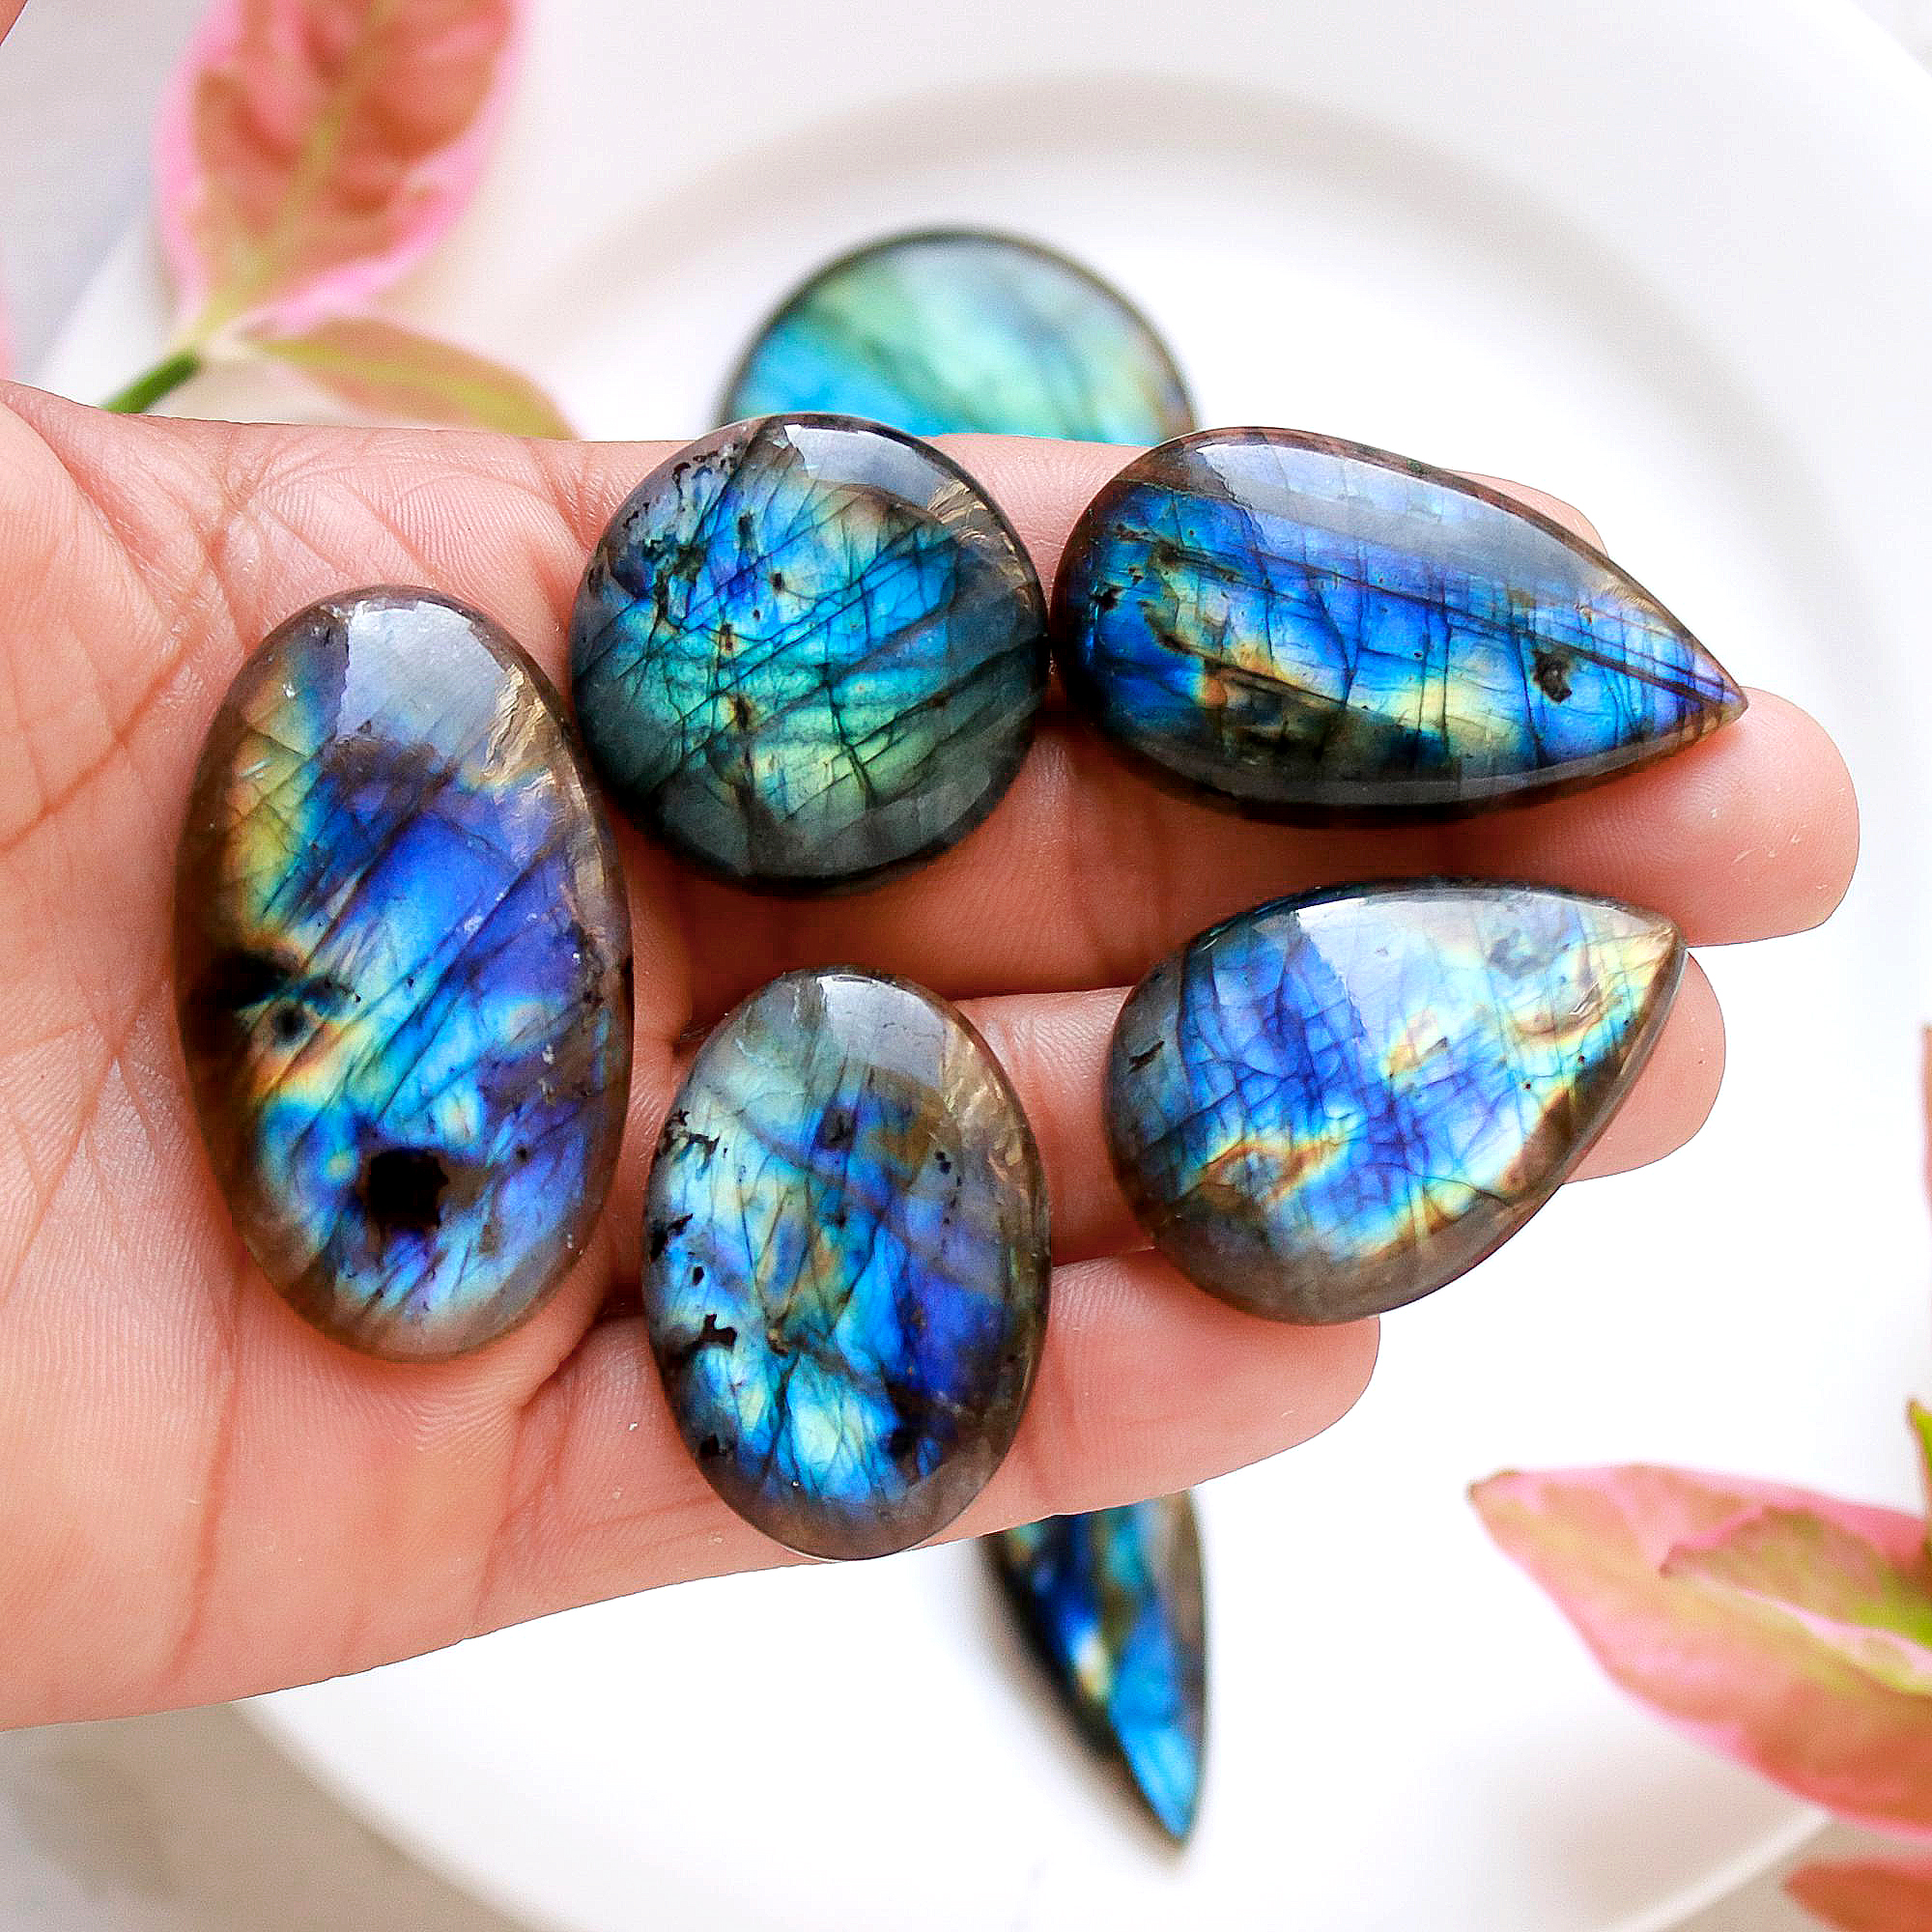 9 Pcs.563 Cts Natural labradorite Cabochon Loose Gemstone For Jewelry Wholesale Lot Size 47x30 37x26mm#1117